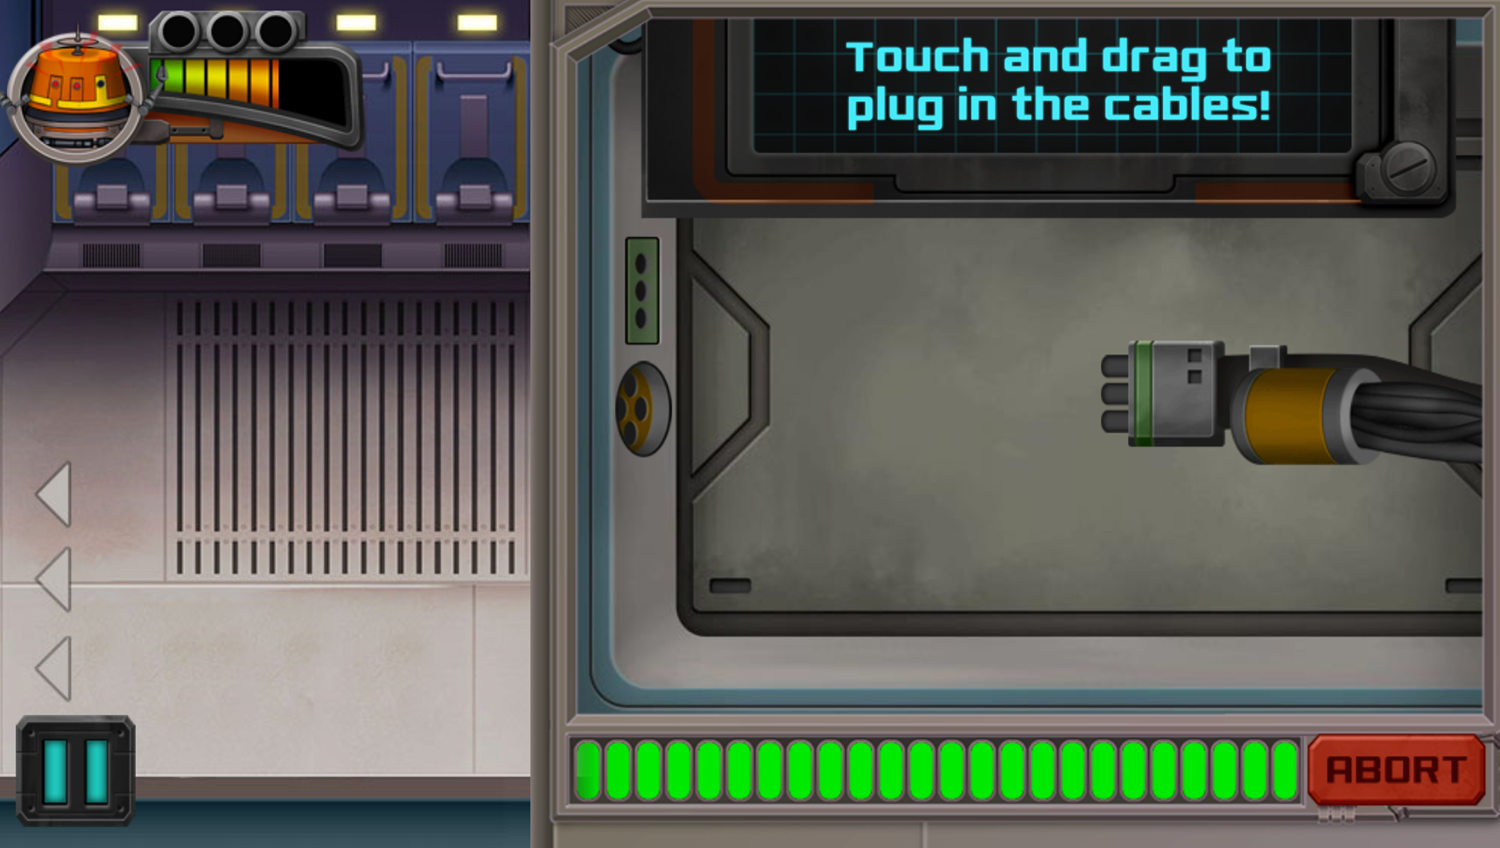 Star Wars Rebels Chopper Chase Game Plug Cable How To Play Screenshot.